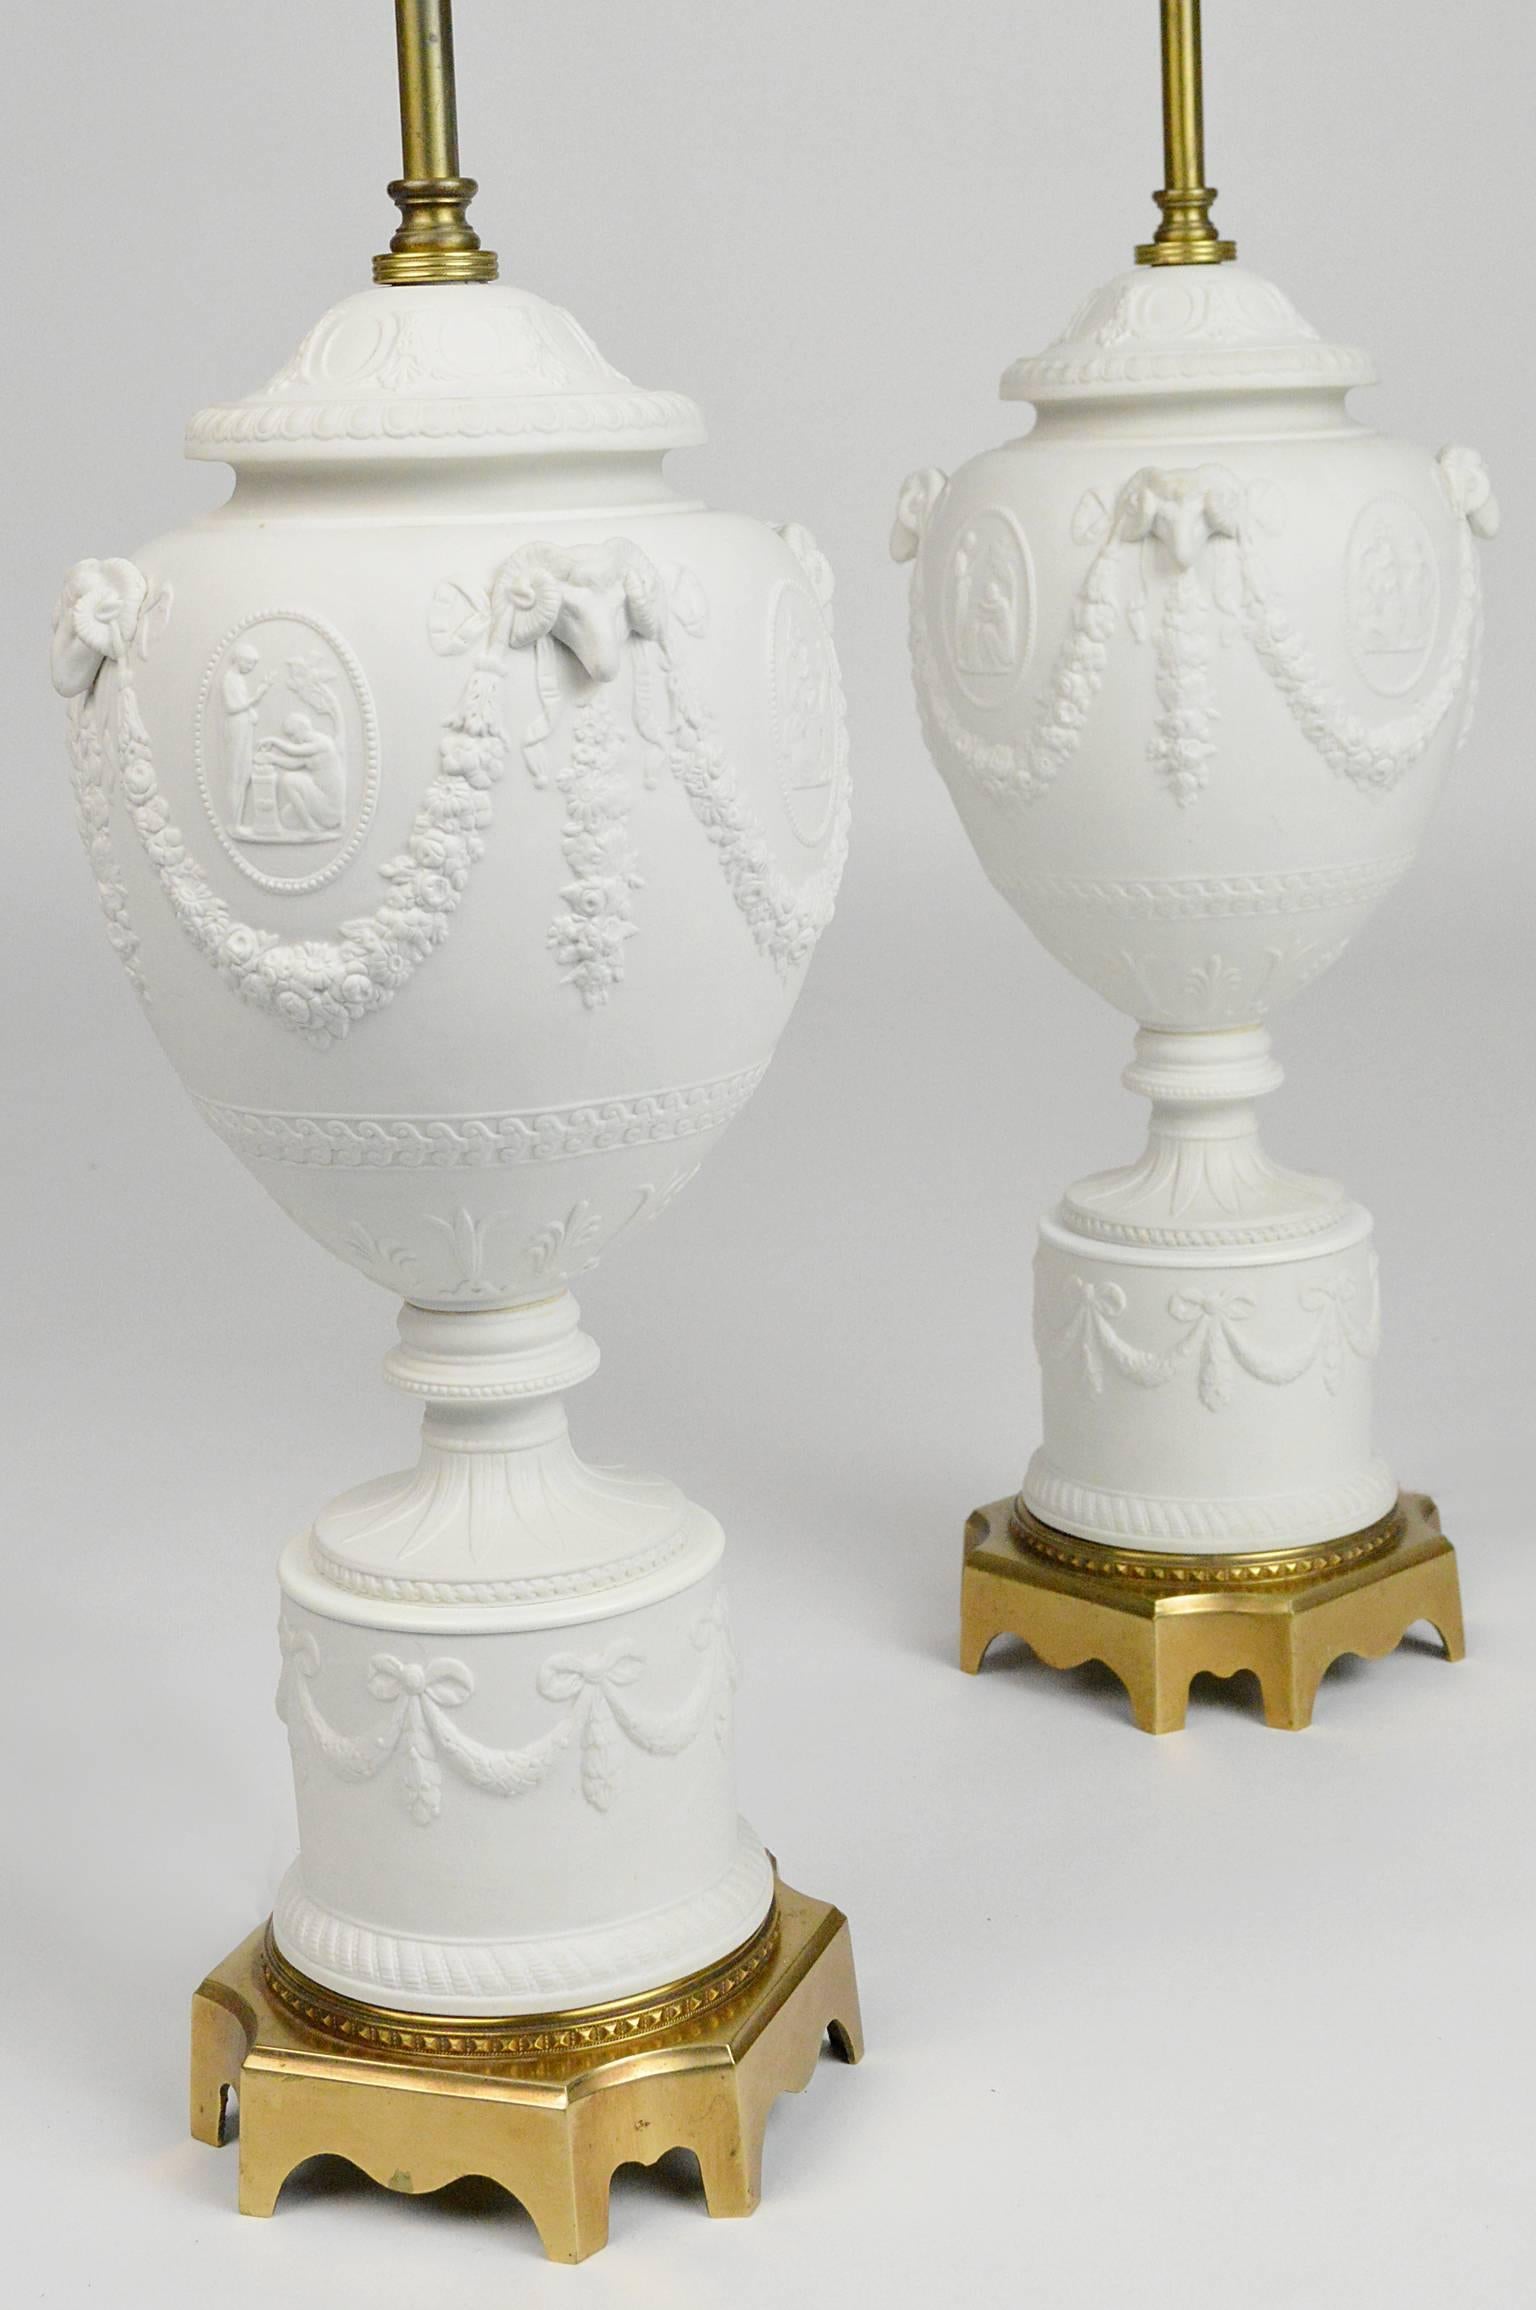 Pair of Warren Kessler American neoclassical style white parian bisque porcelain baluster-form lamps, each adorned with raised floral festoons emanating from rams heads among classical reserves, raised on brass plinth. Stamped 'Warren Kessler, NY'